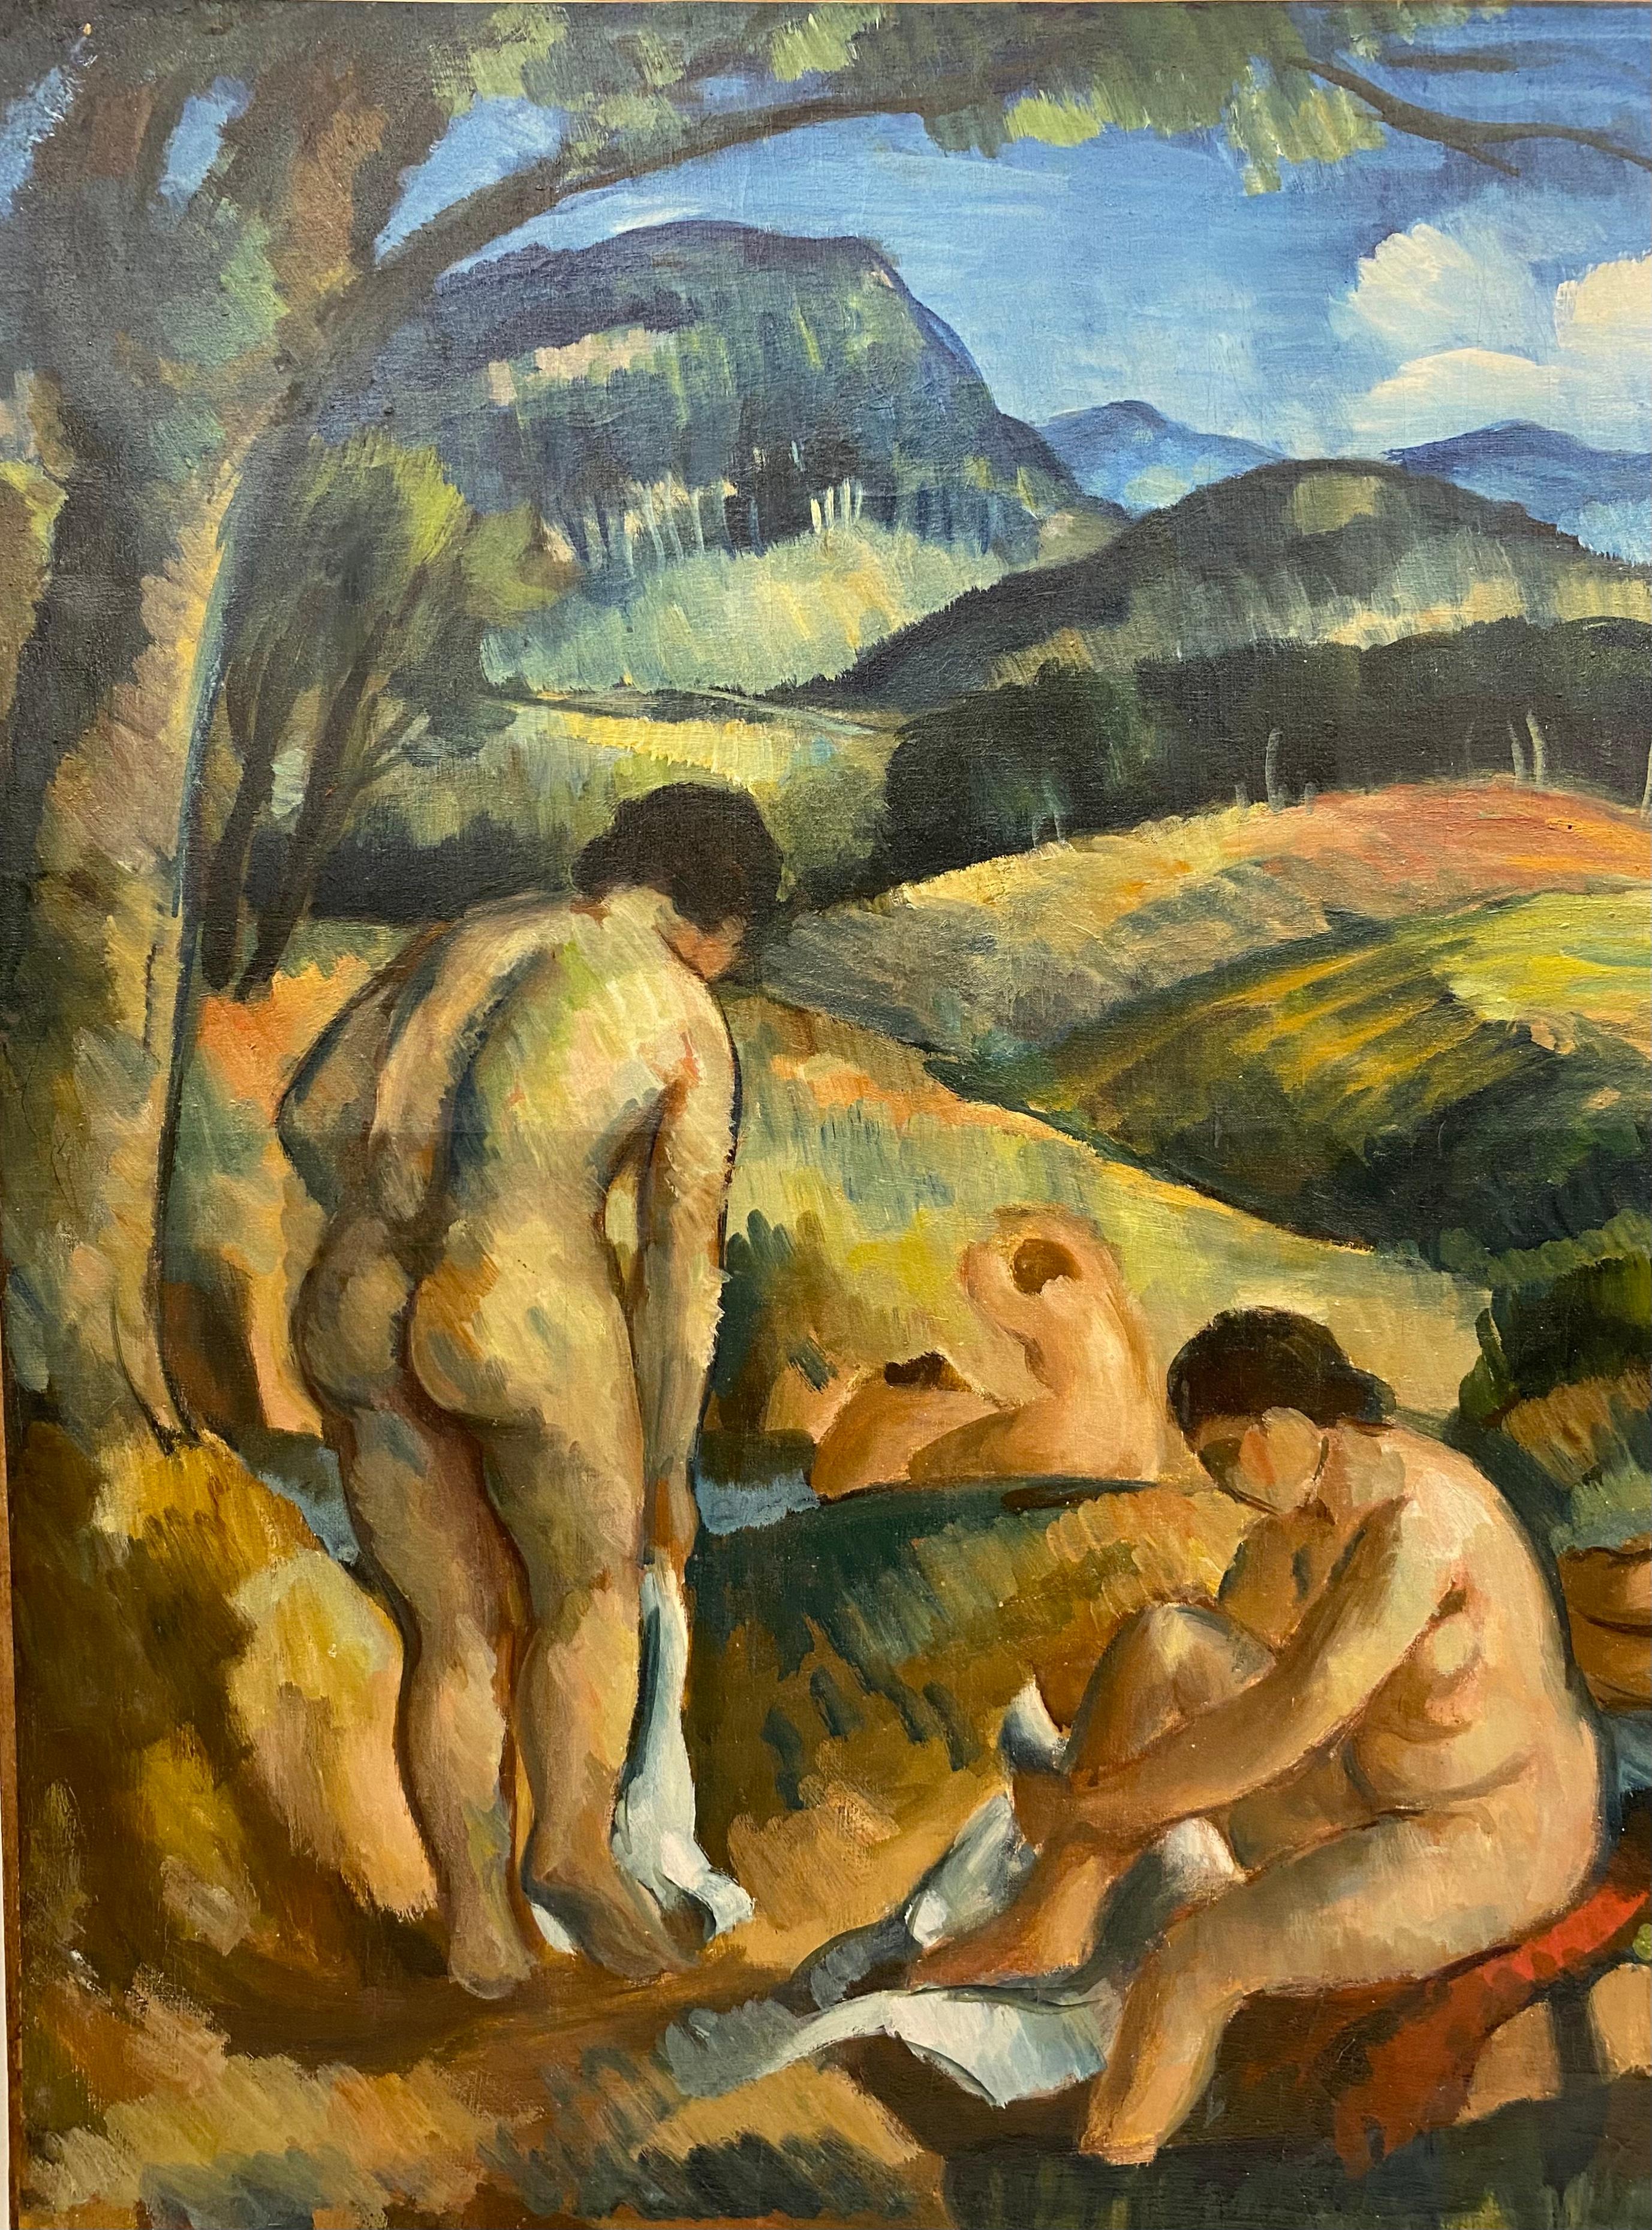 A fine painting depicting Les Grandes Baigneuses in the manner of Paul Cezanne's famous works of art. 

This beautiful painting was executed by an artist from Toulon named 
Marius Fely-Mouttet as noted on the back of the antique canvas. 

About this